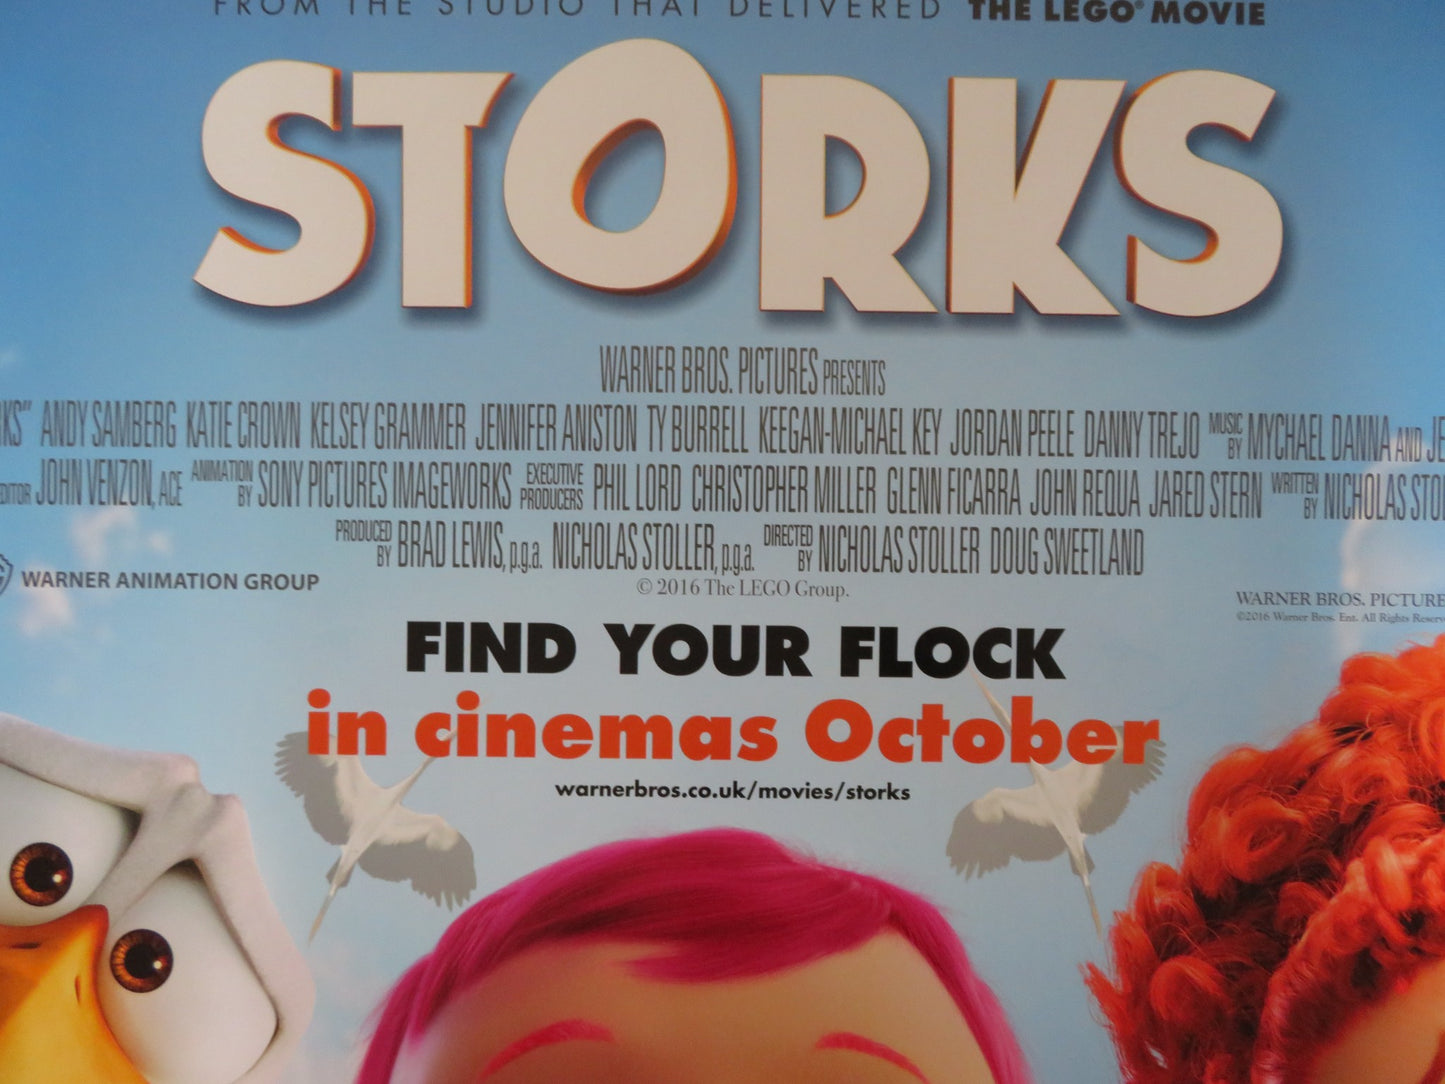 STORKS UK QUAD (30"x 40") ROLLED POSTER ANDY SAMBERG KATIE CROWN 2016